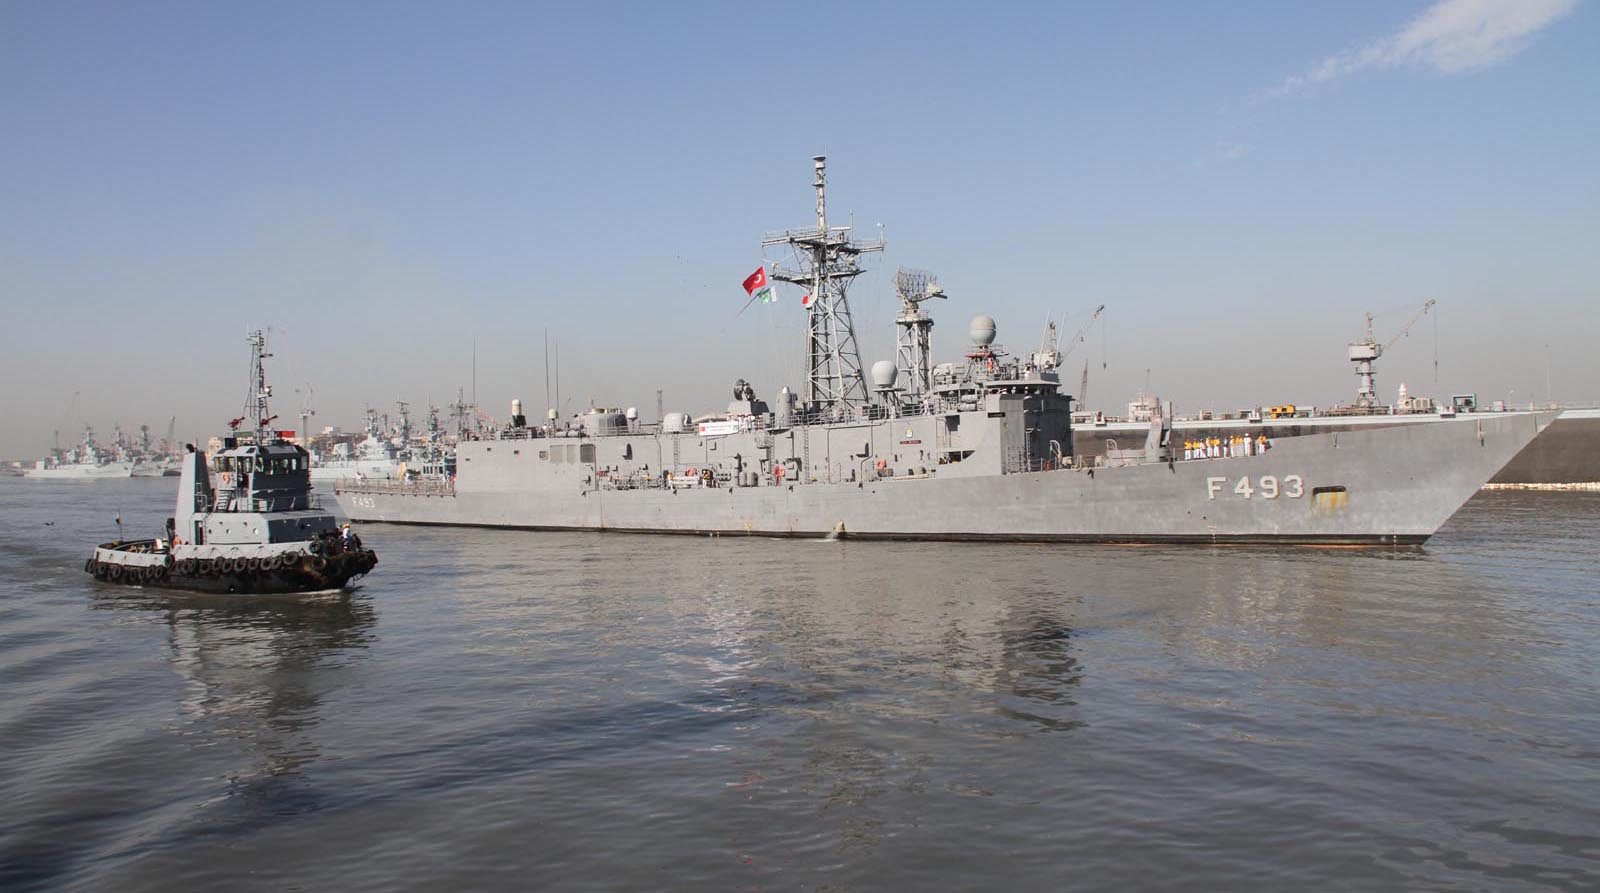 Turkish Navy Ship arriving Karachi Harbor to participate in naval exercise.